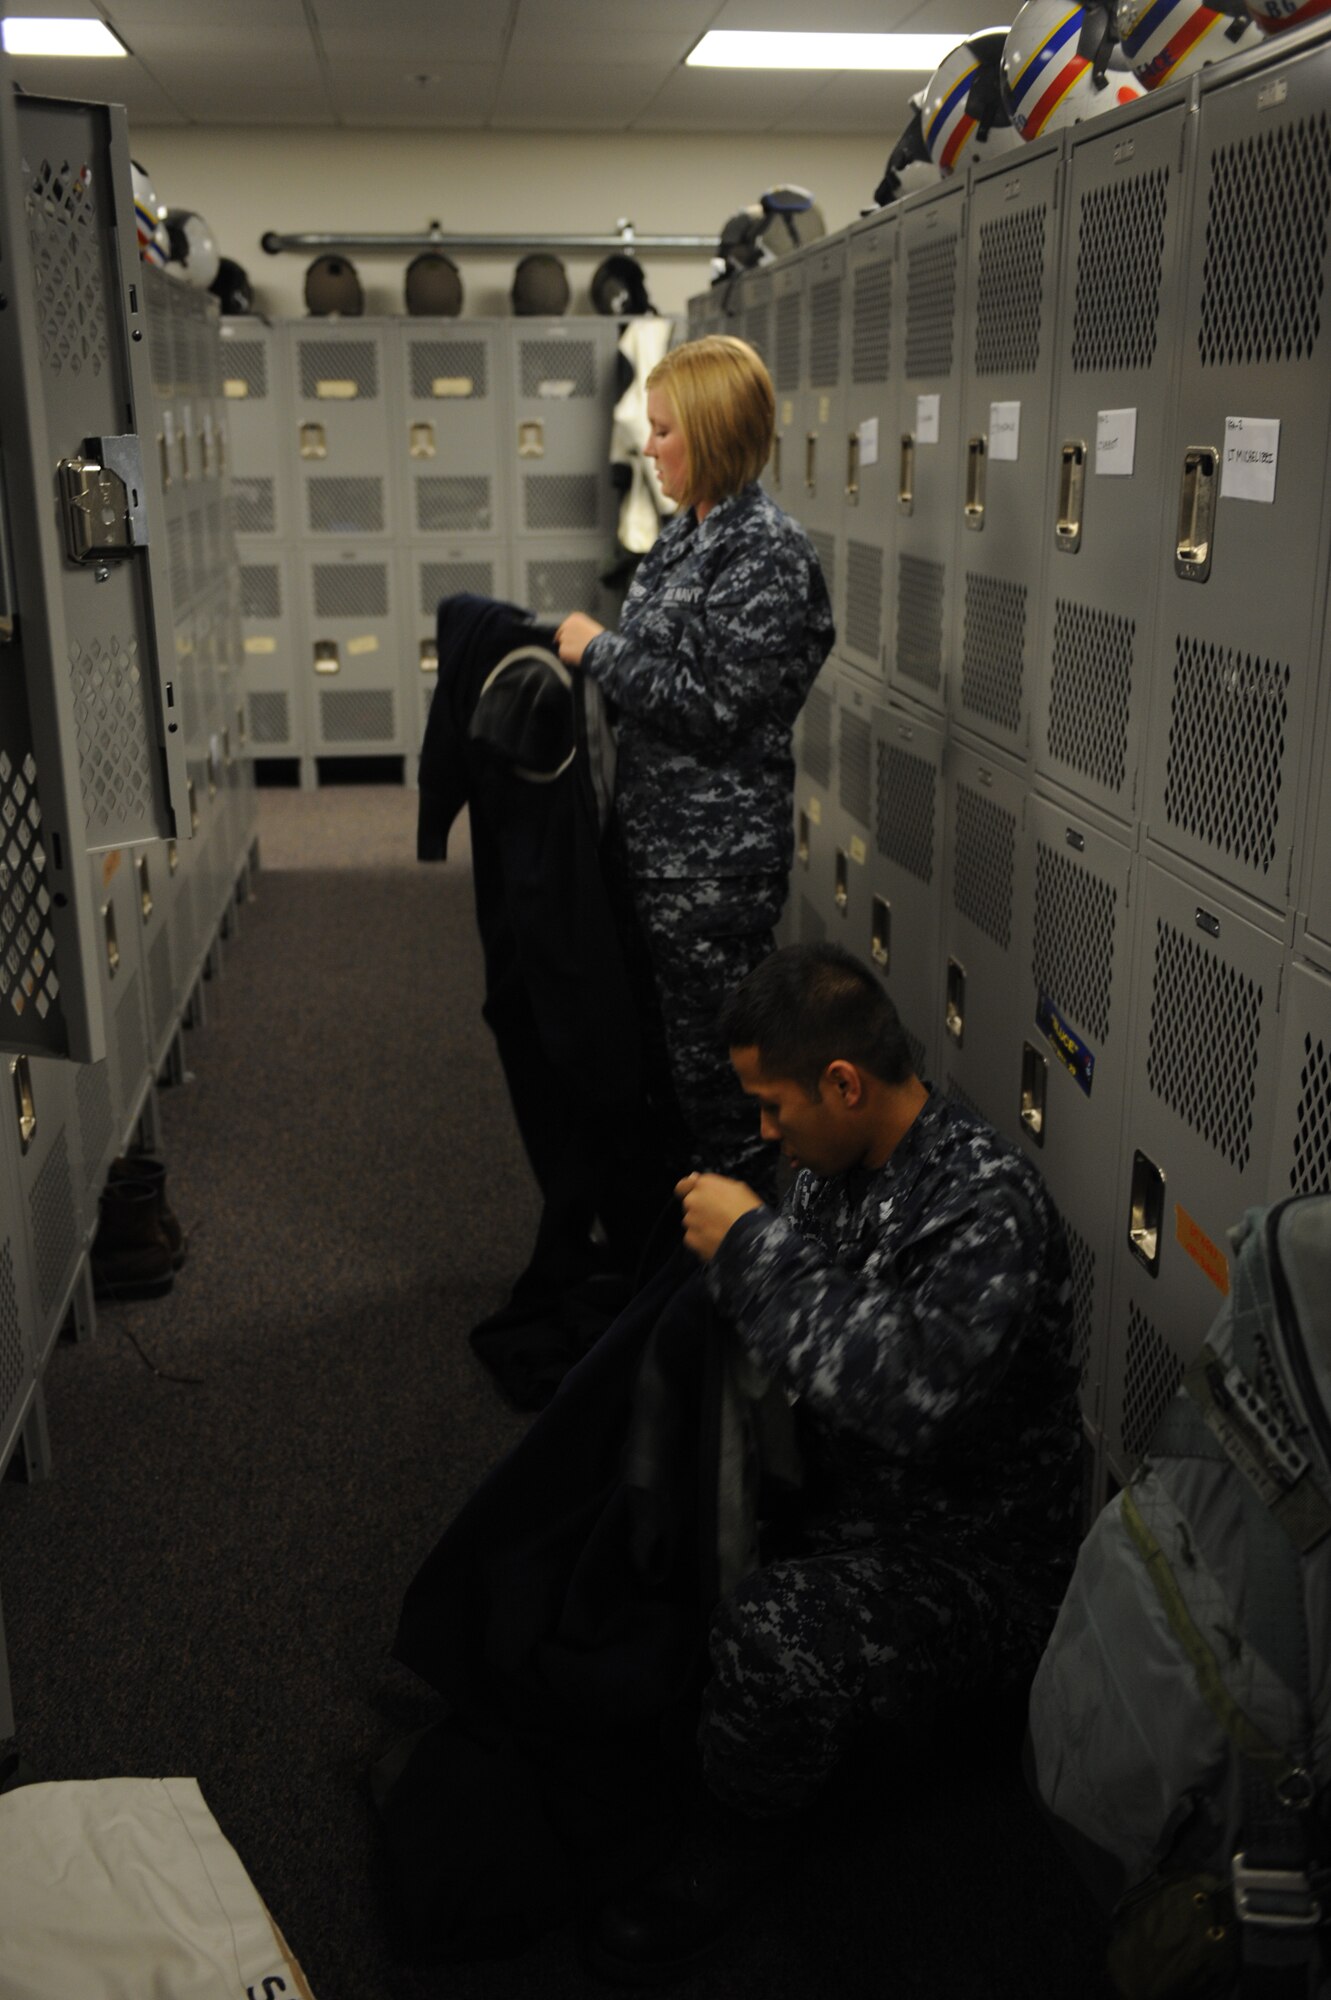 JOINT BASE ELMENDORF RICHARDSON, Alaska -- U.S. Navy Parachute Rigger 2nd Class Nathaniel Santos and Parachute Rigger Airman Jessica Tescher put away pilots gear and prepare the lockers for future flights during Exercise Northern Edge 11, in JBER, Alaska, June 16, 2011. Northern Edge, Alaska's largest military training exercise, is designed to prepare joint forces to respond to crises throughout the Asia-Pacific region. (Photo by Mass Communication Specialist 2nd Class Rufus Hucks)